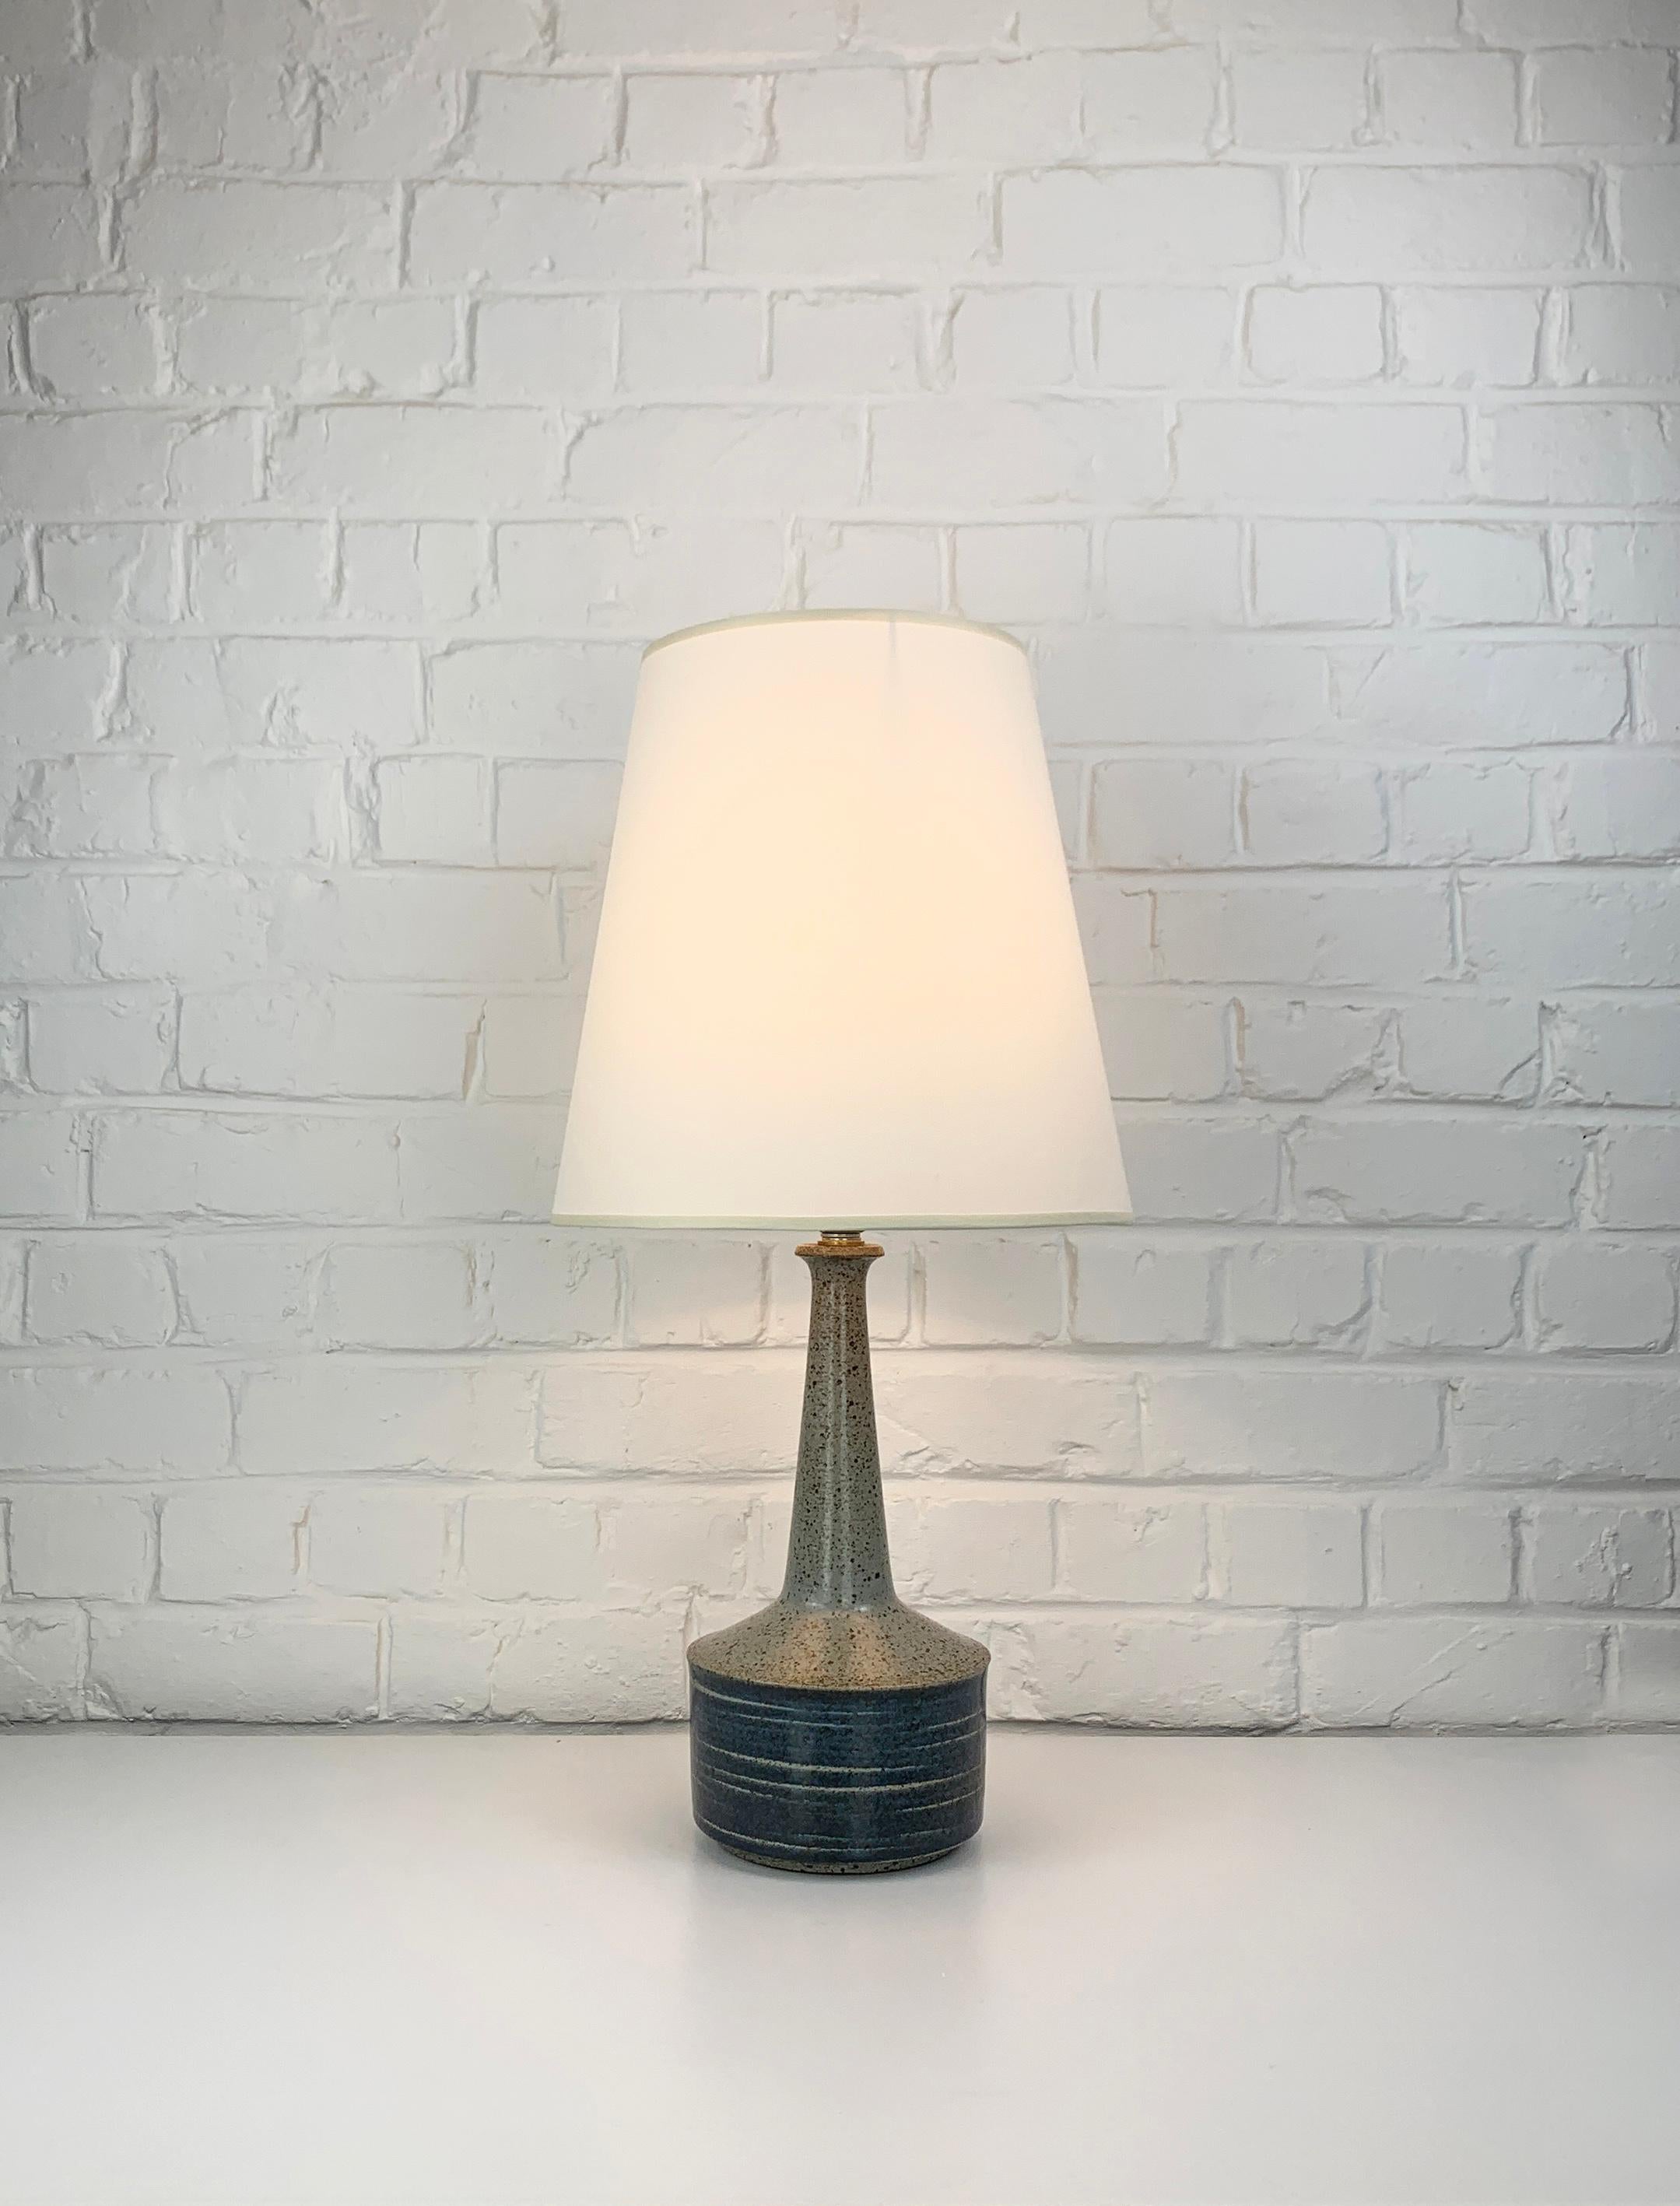 Table lamp model DL44 produced by Palshus (Denmark). 

The lamp base is finished with a blue and grey glaze. The chamotte clay gives a natural and living surface. It is signed under the base (PLS for Per Linnemann-Schmidt).

Palshus has been founded